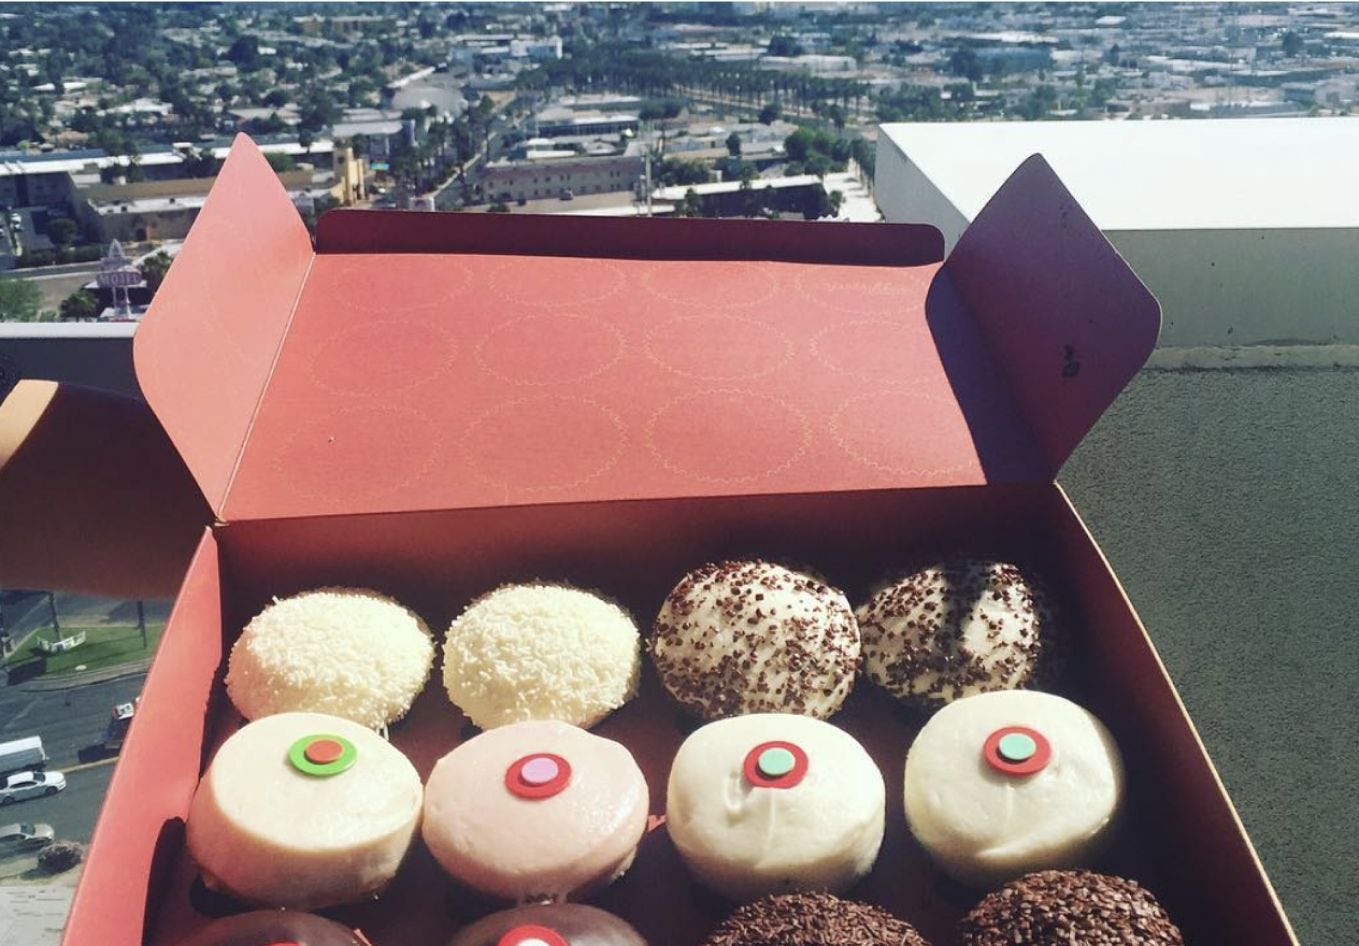 Box of delicious looking donuts overlooking a city from a rooftop. 